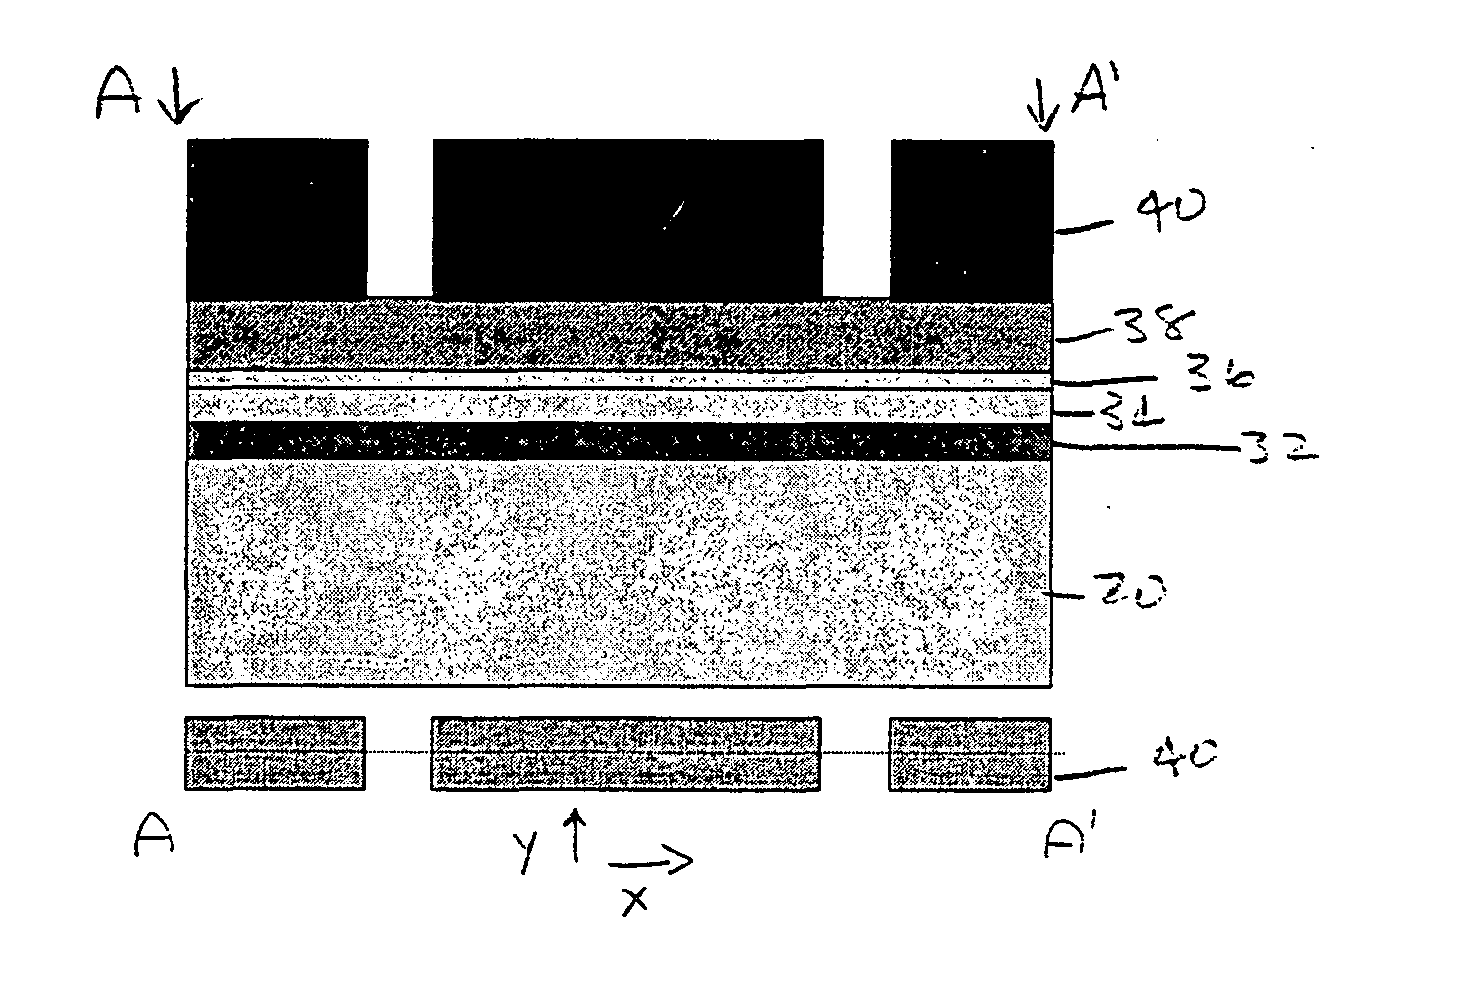 Fabrication of silicon-on-nothing (SON) MOSFET fabrication using selective etching of Si1-xGex layer